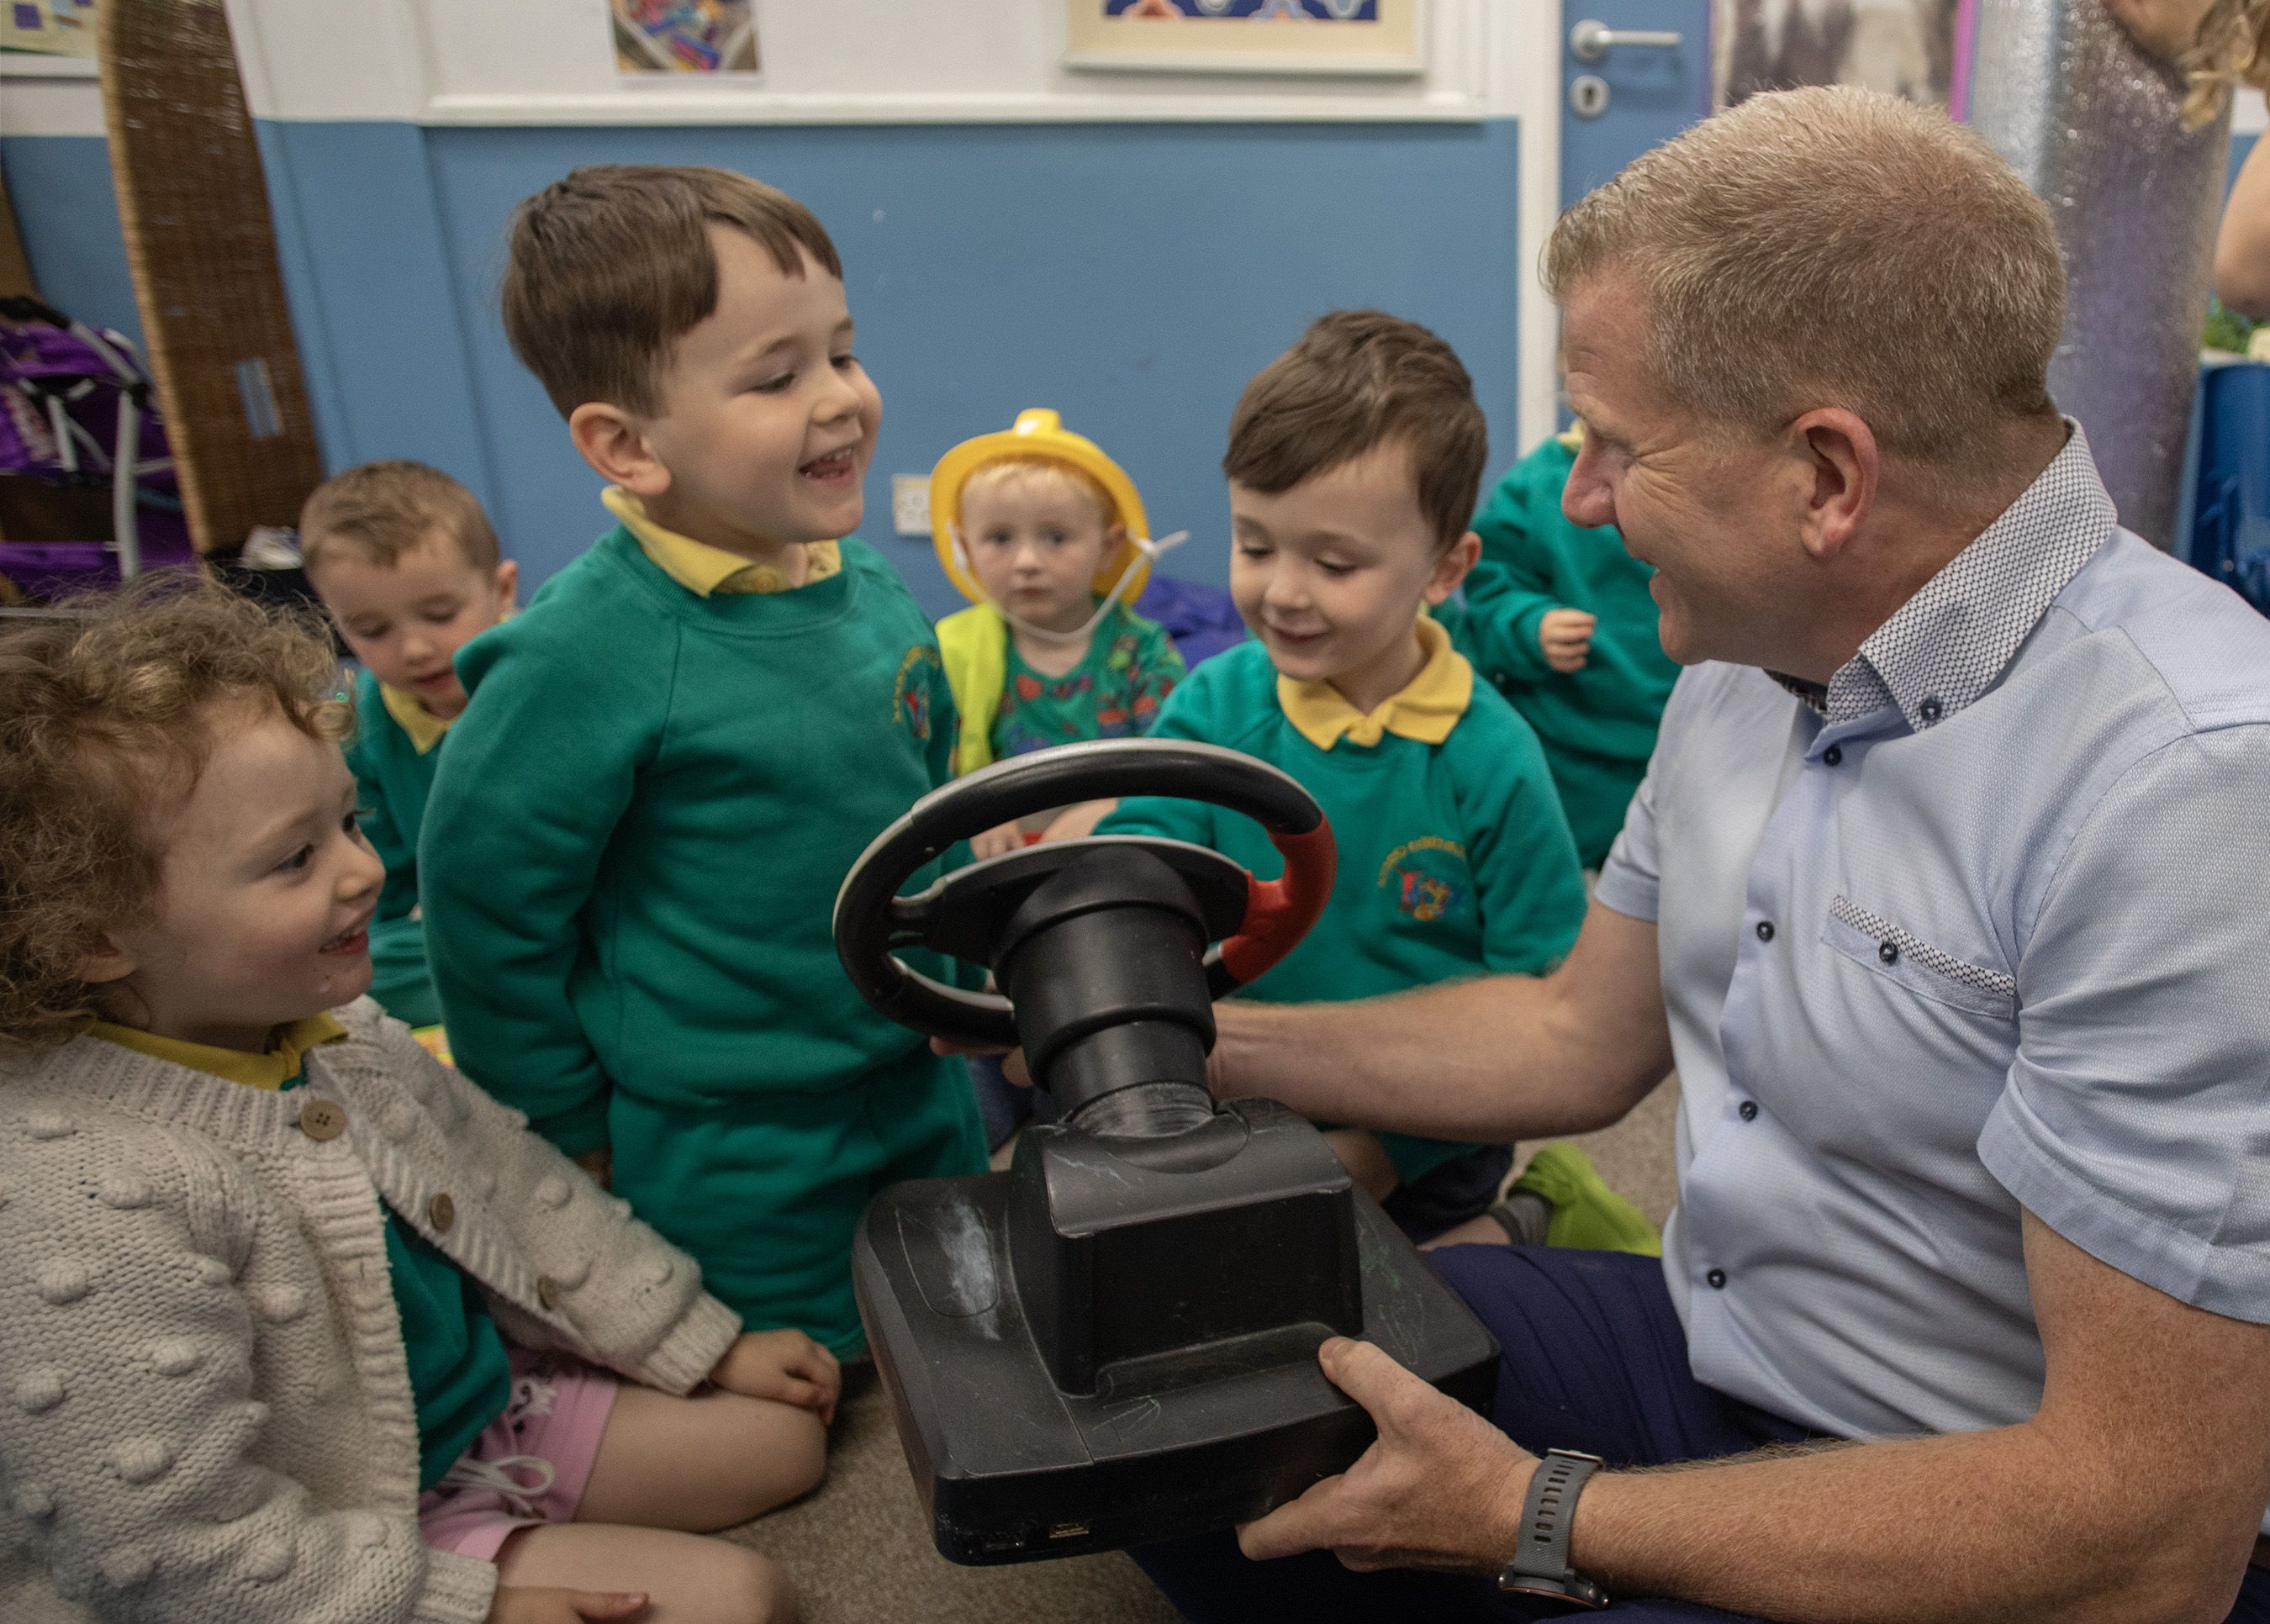 IRISH LANGUAGE LEARNING: NI Commissioner for Children and Young People, Chris Quinn meets with children at Ionad Uíbh Eachach